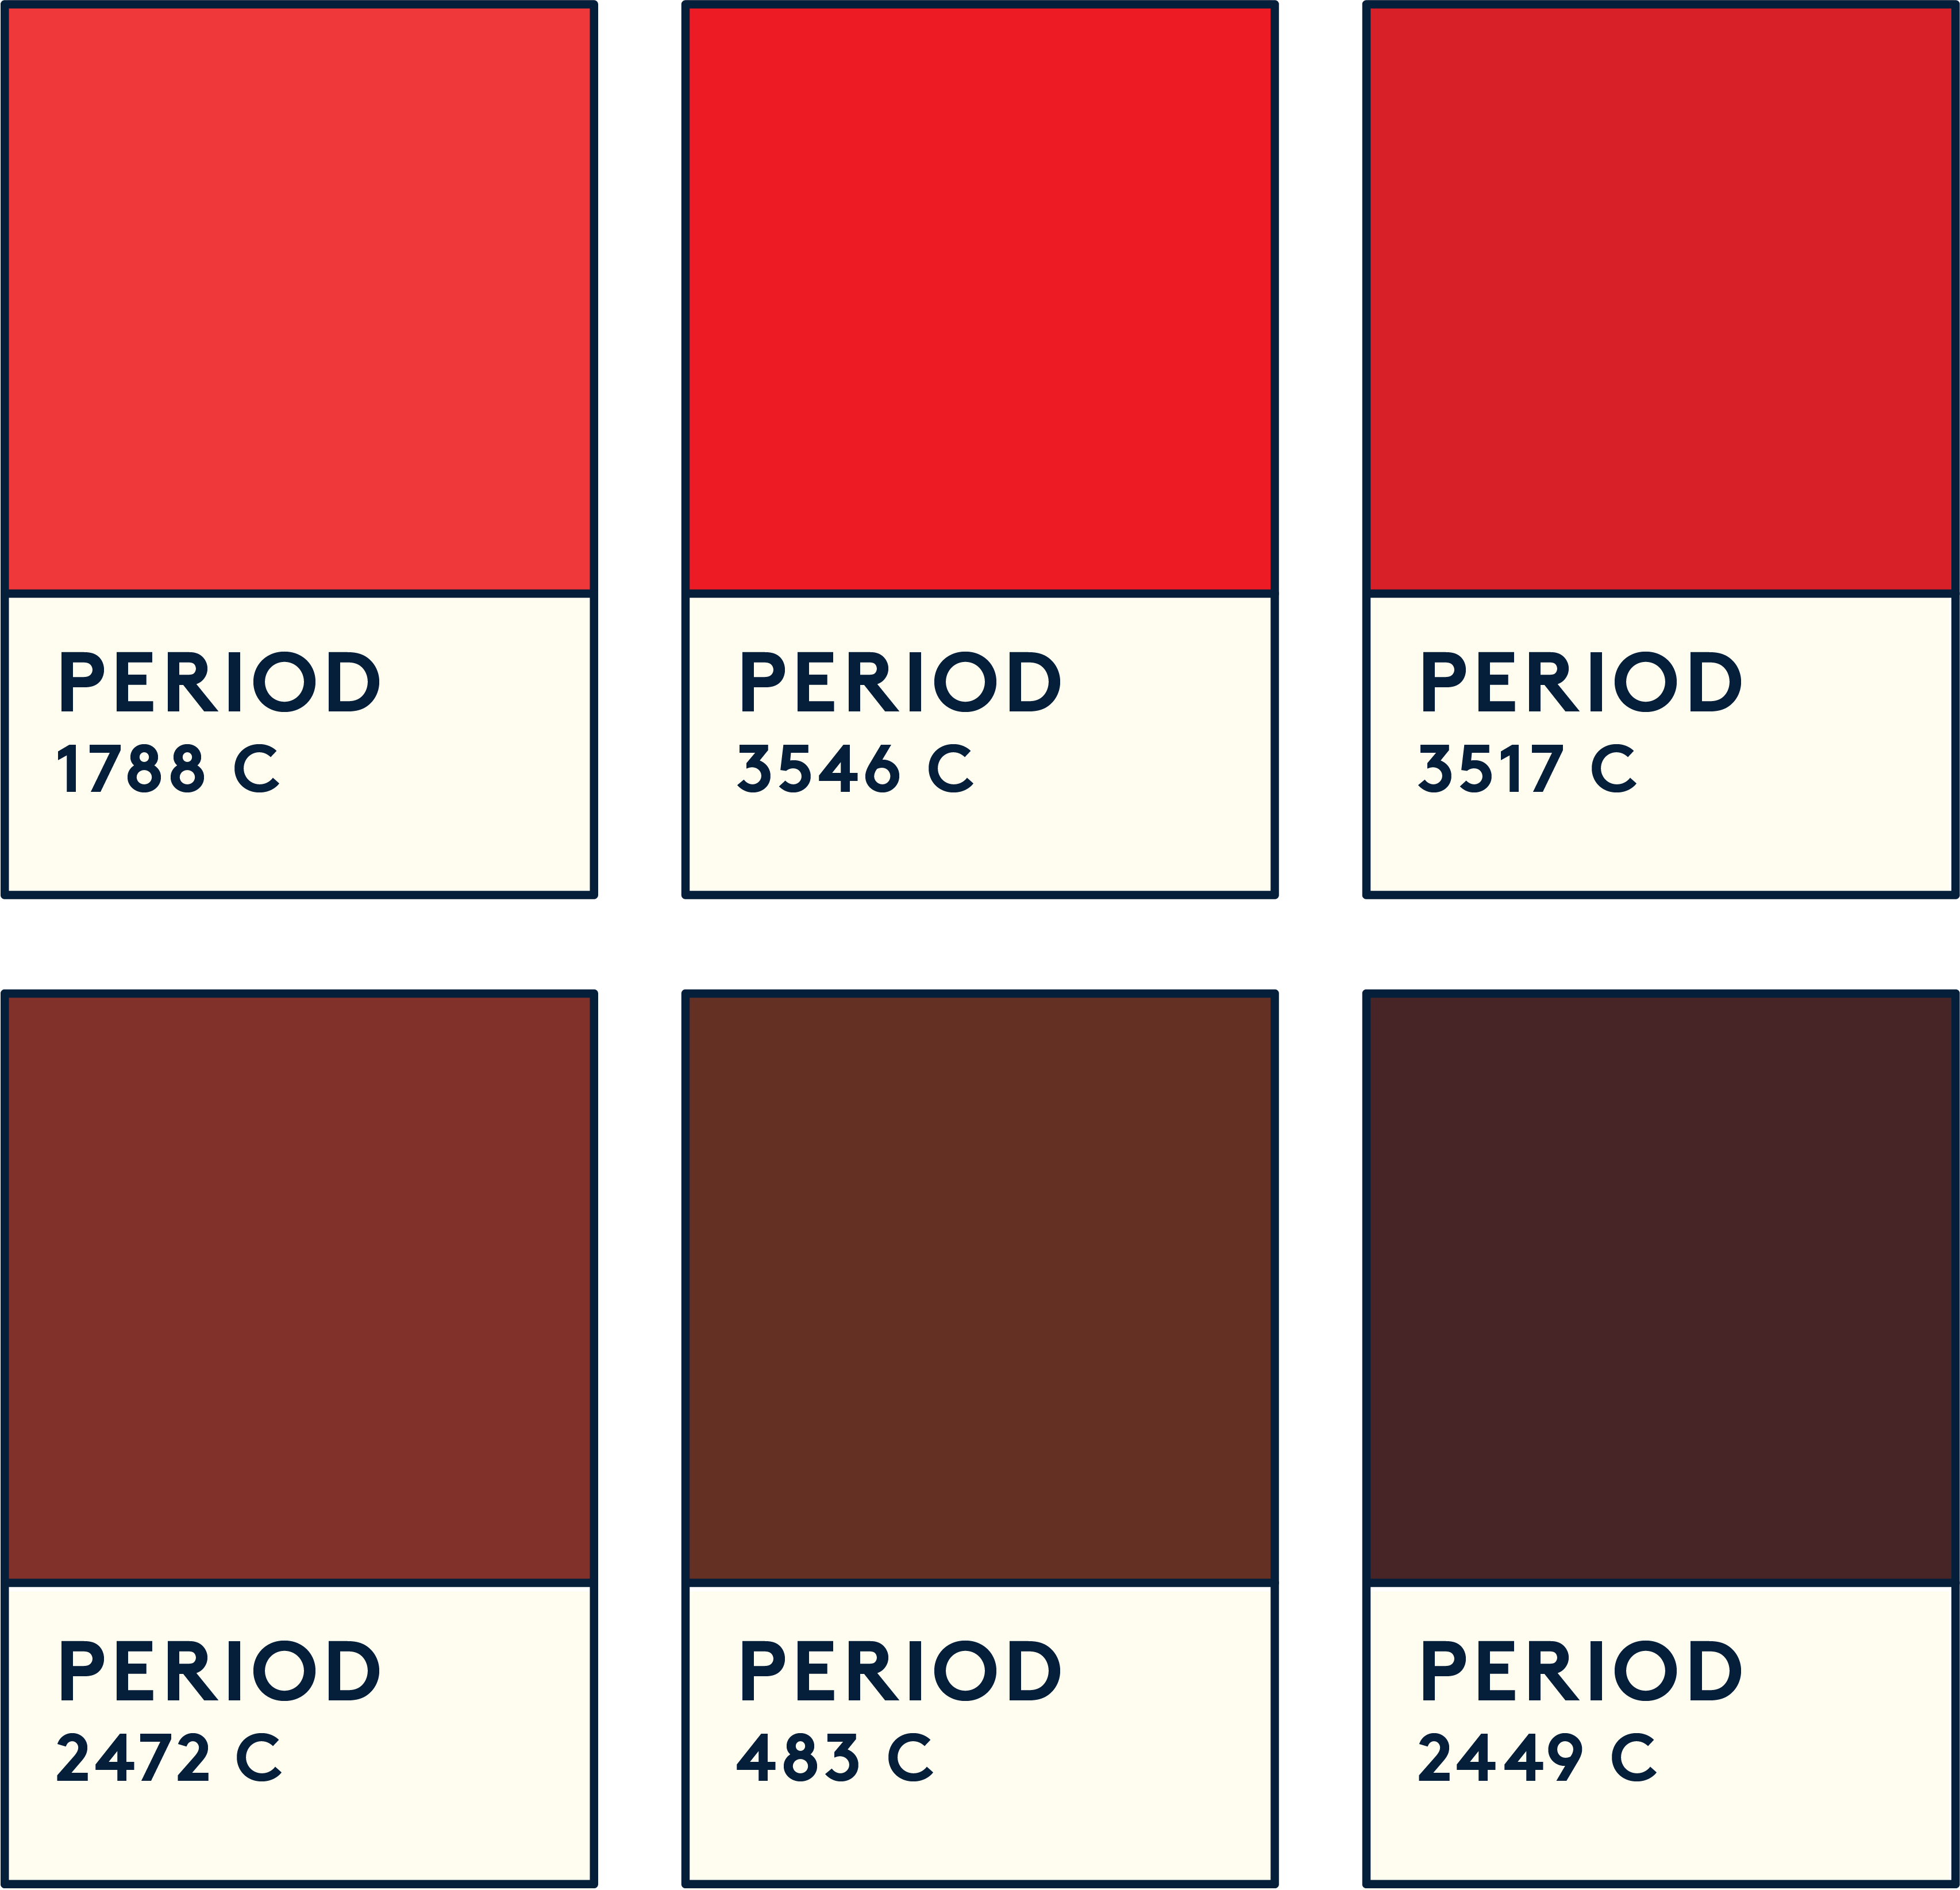 Red? Brown? Grey? What does the color of your period blood mean